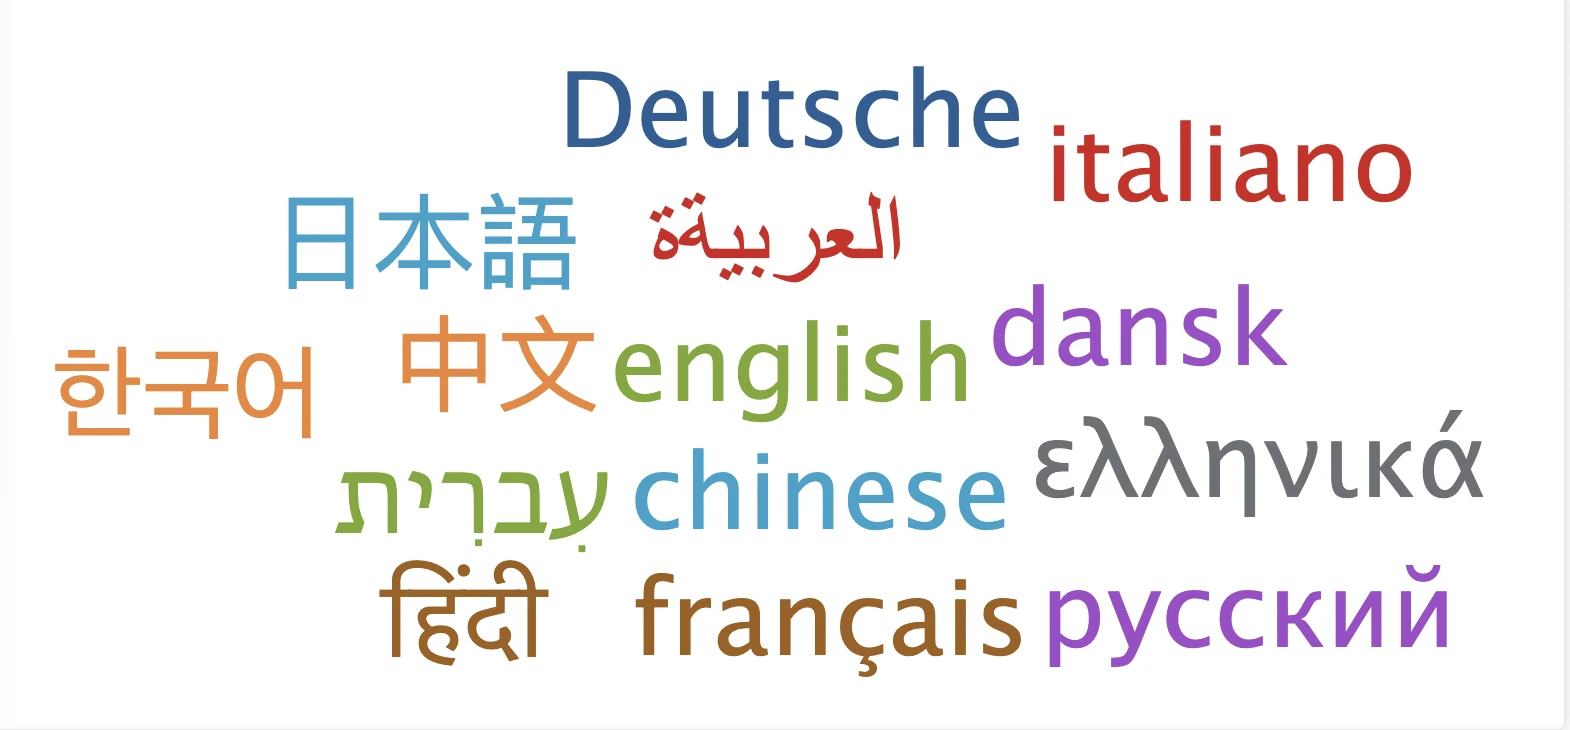 The names of many languages overlayed on one another